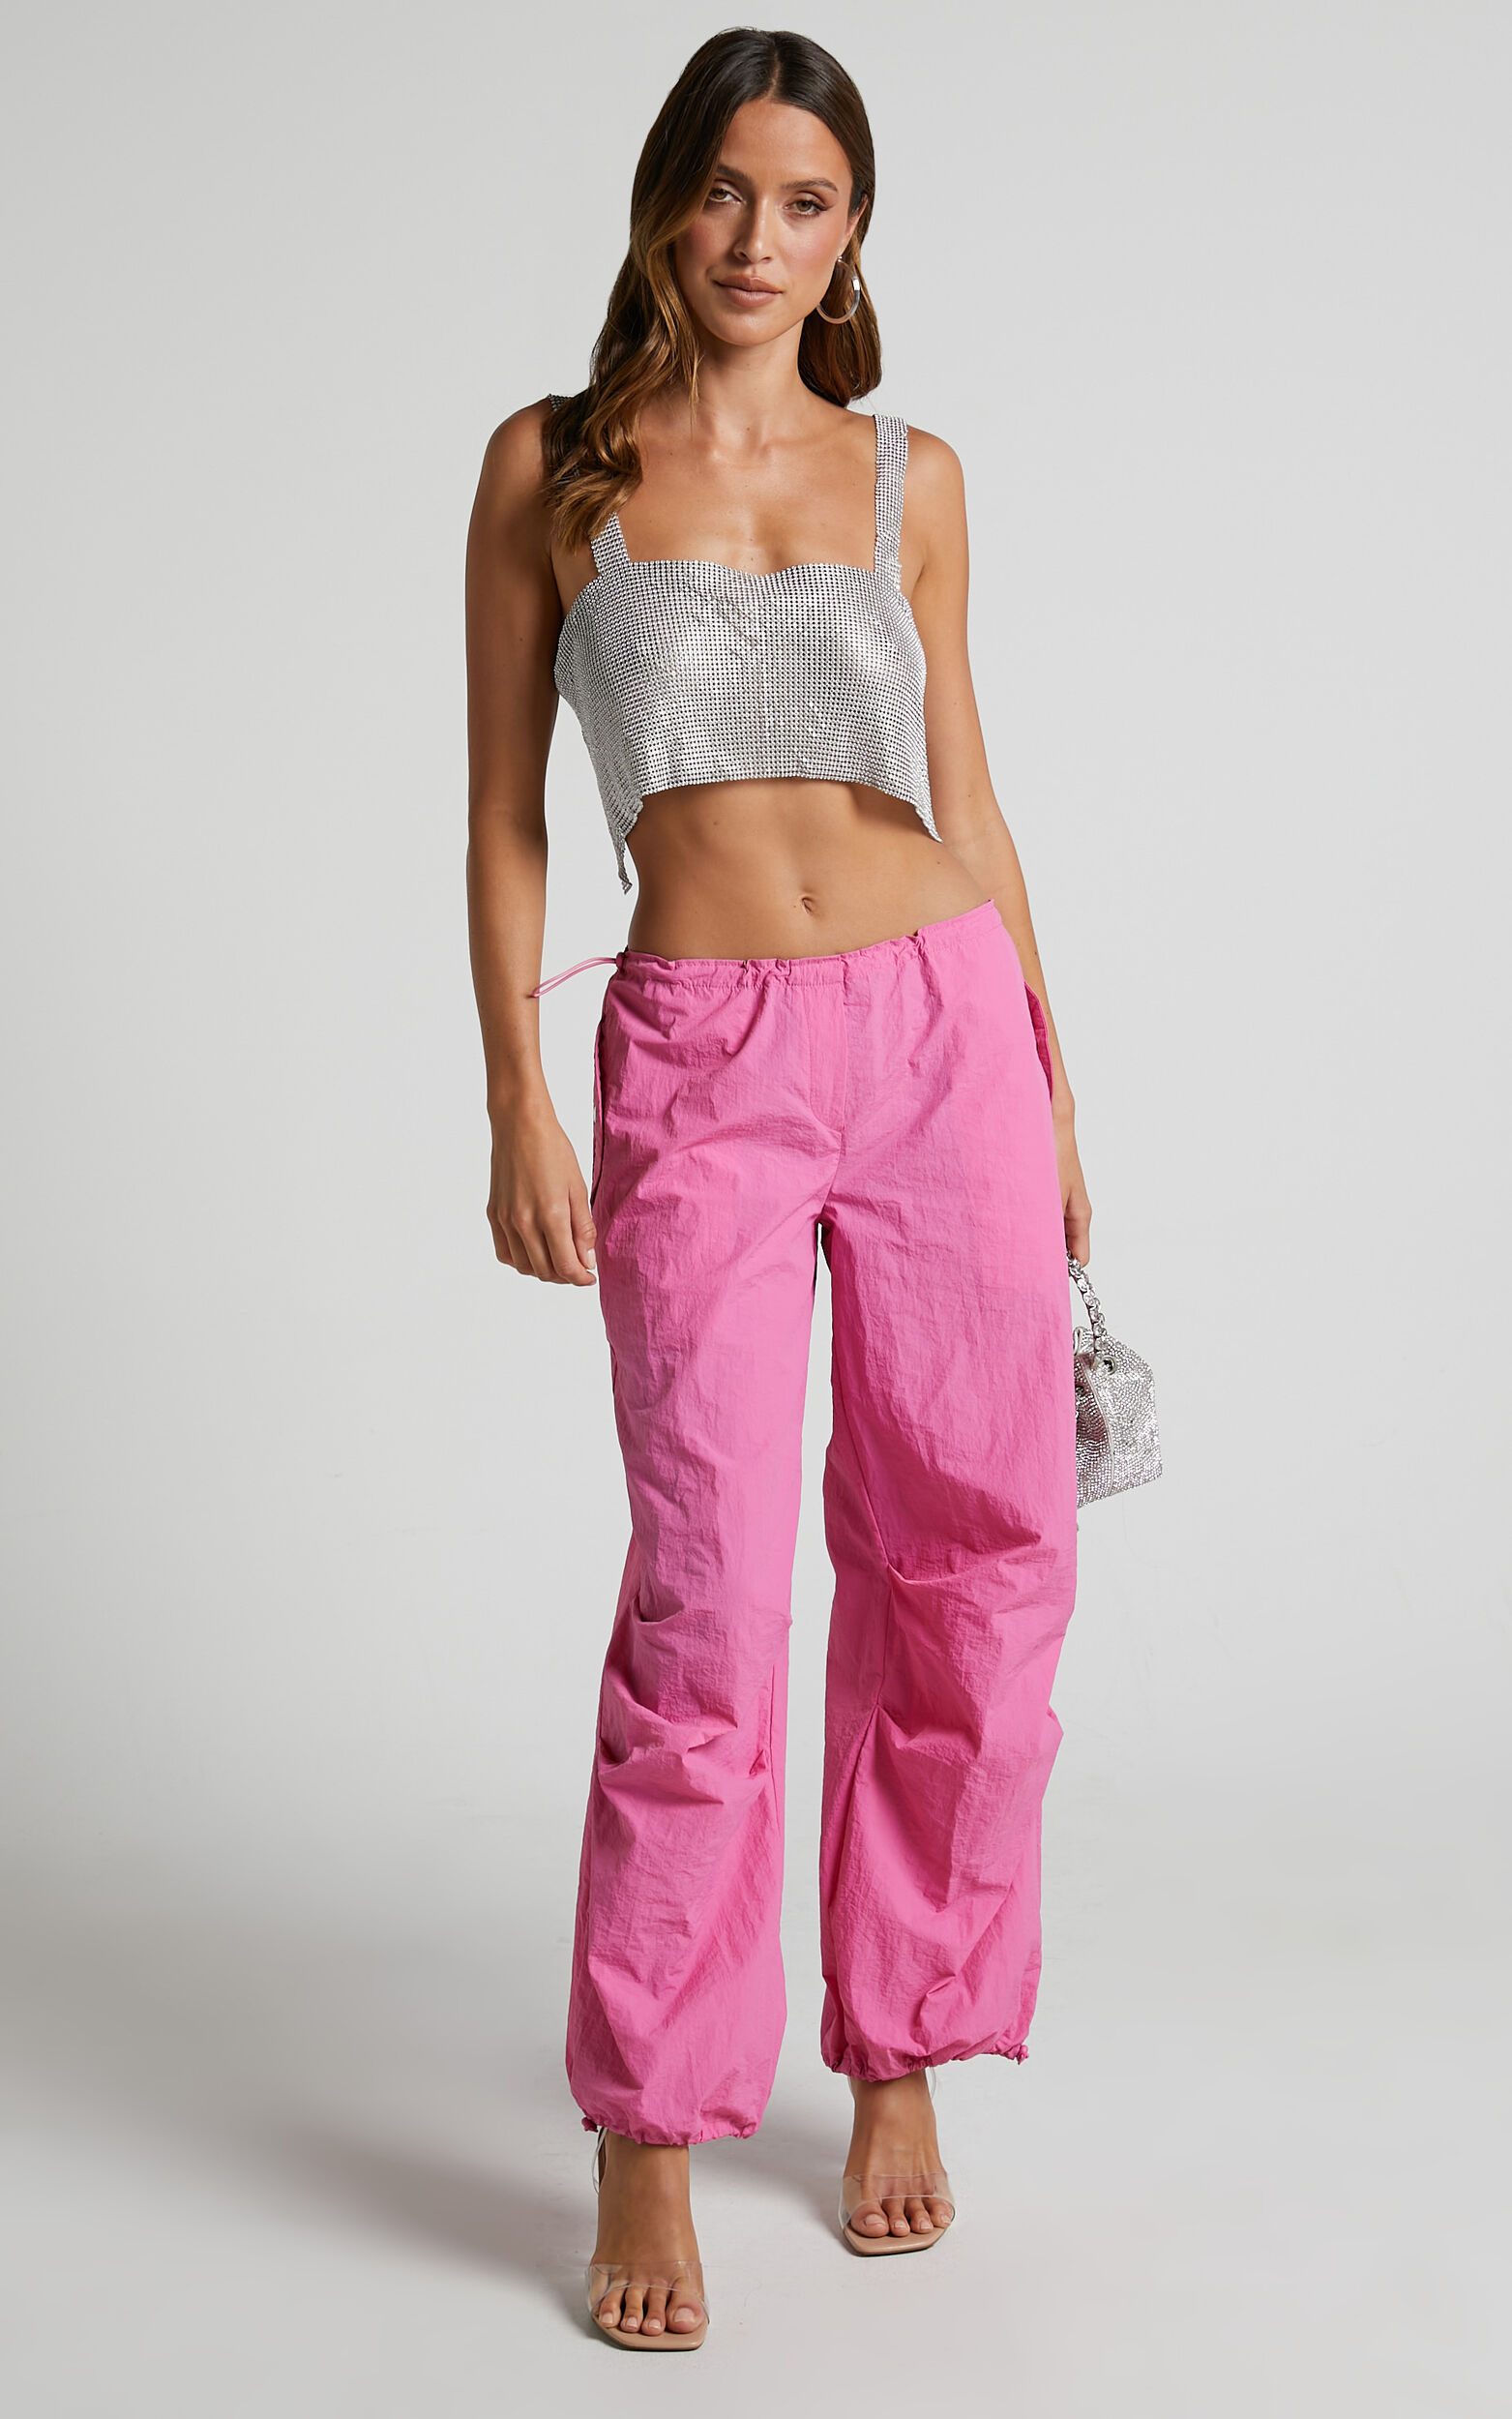 Utility Low Rise Parachute Pant in Candy Pink | Showpo